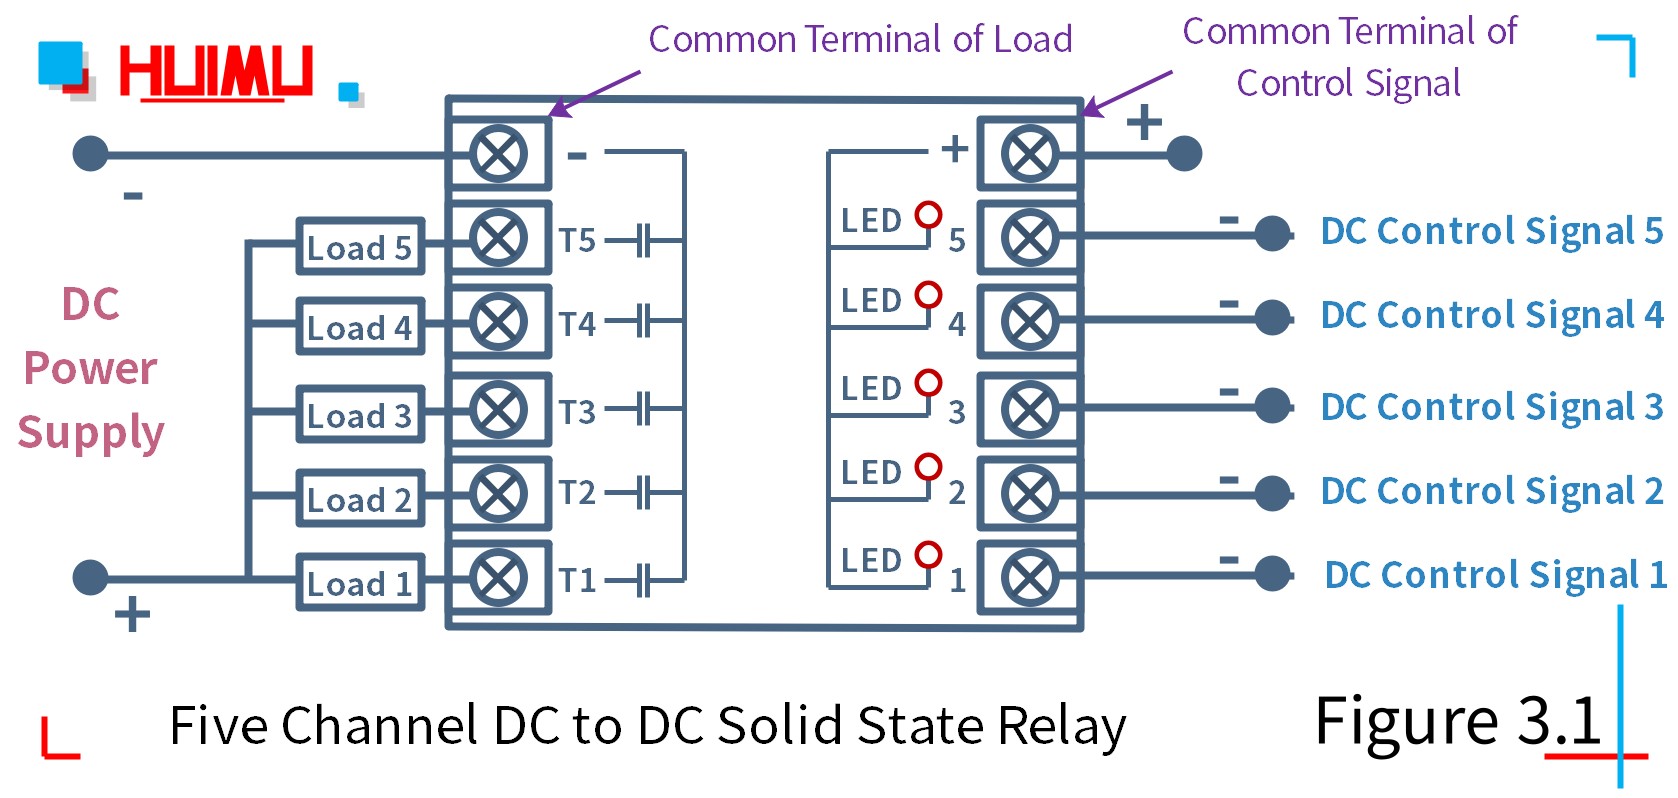 How to wire MGR mager ST5-5DD five channel dc to dc solid state relay?